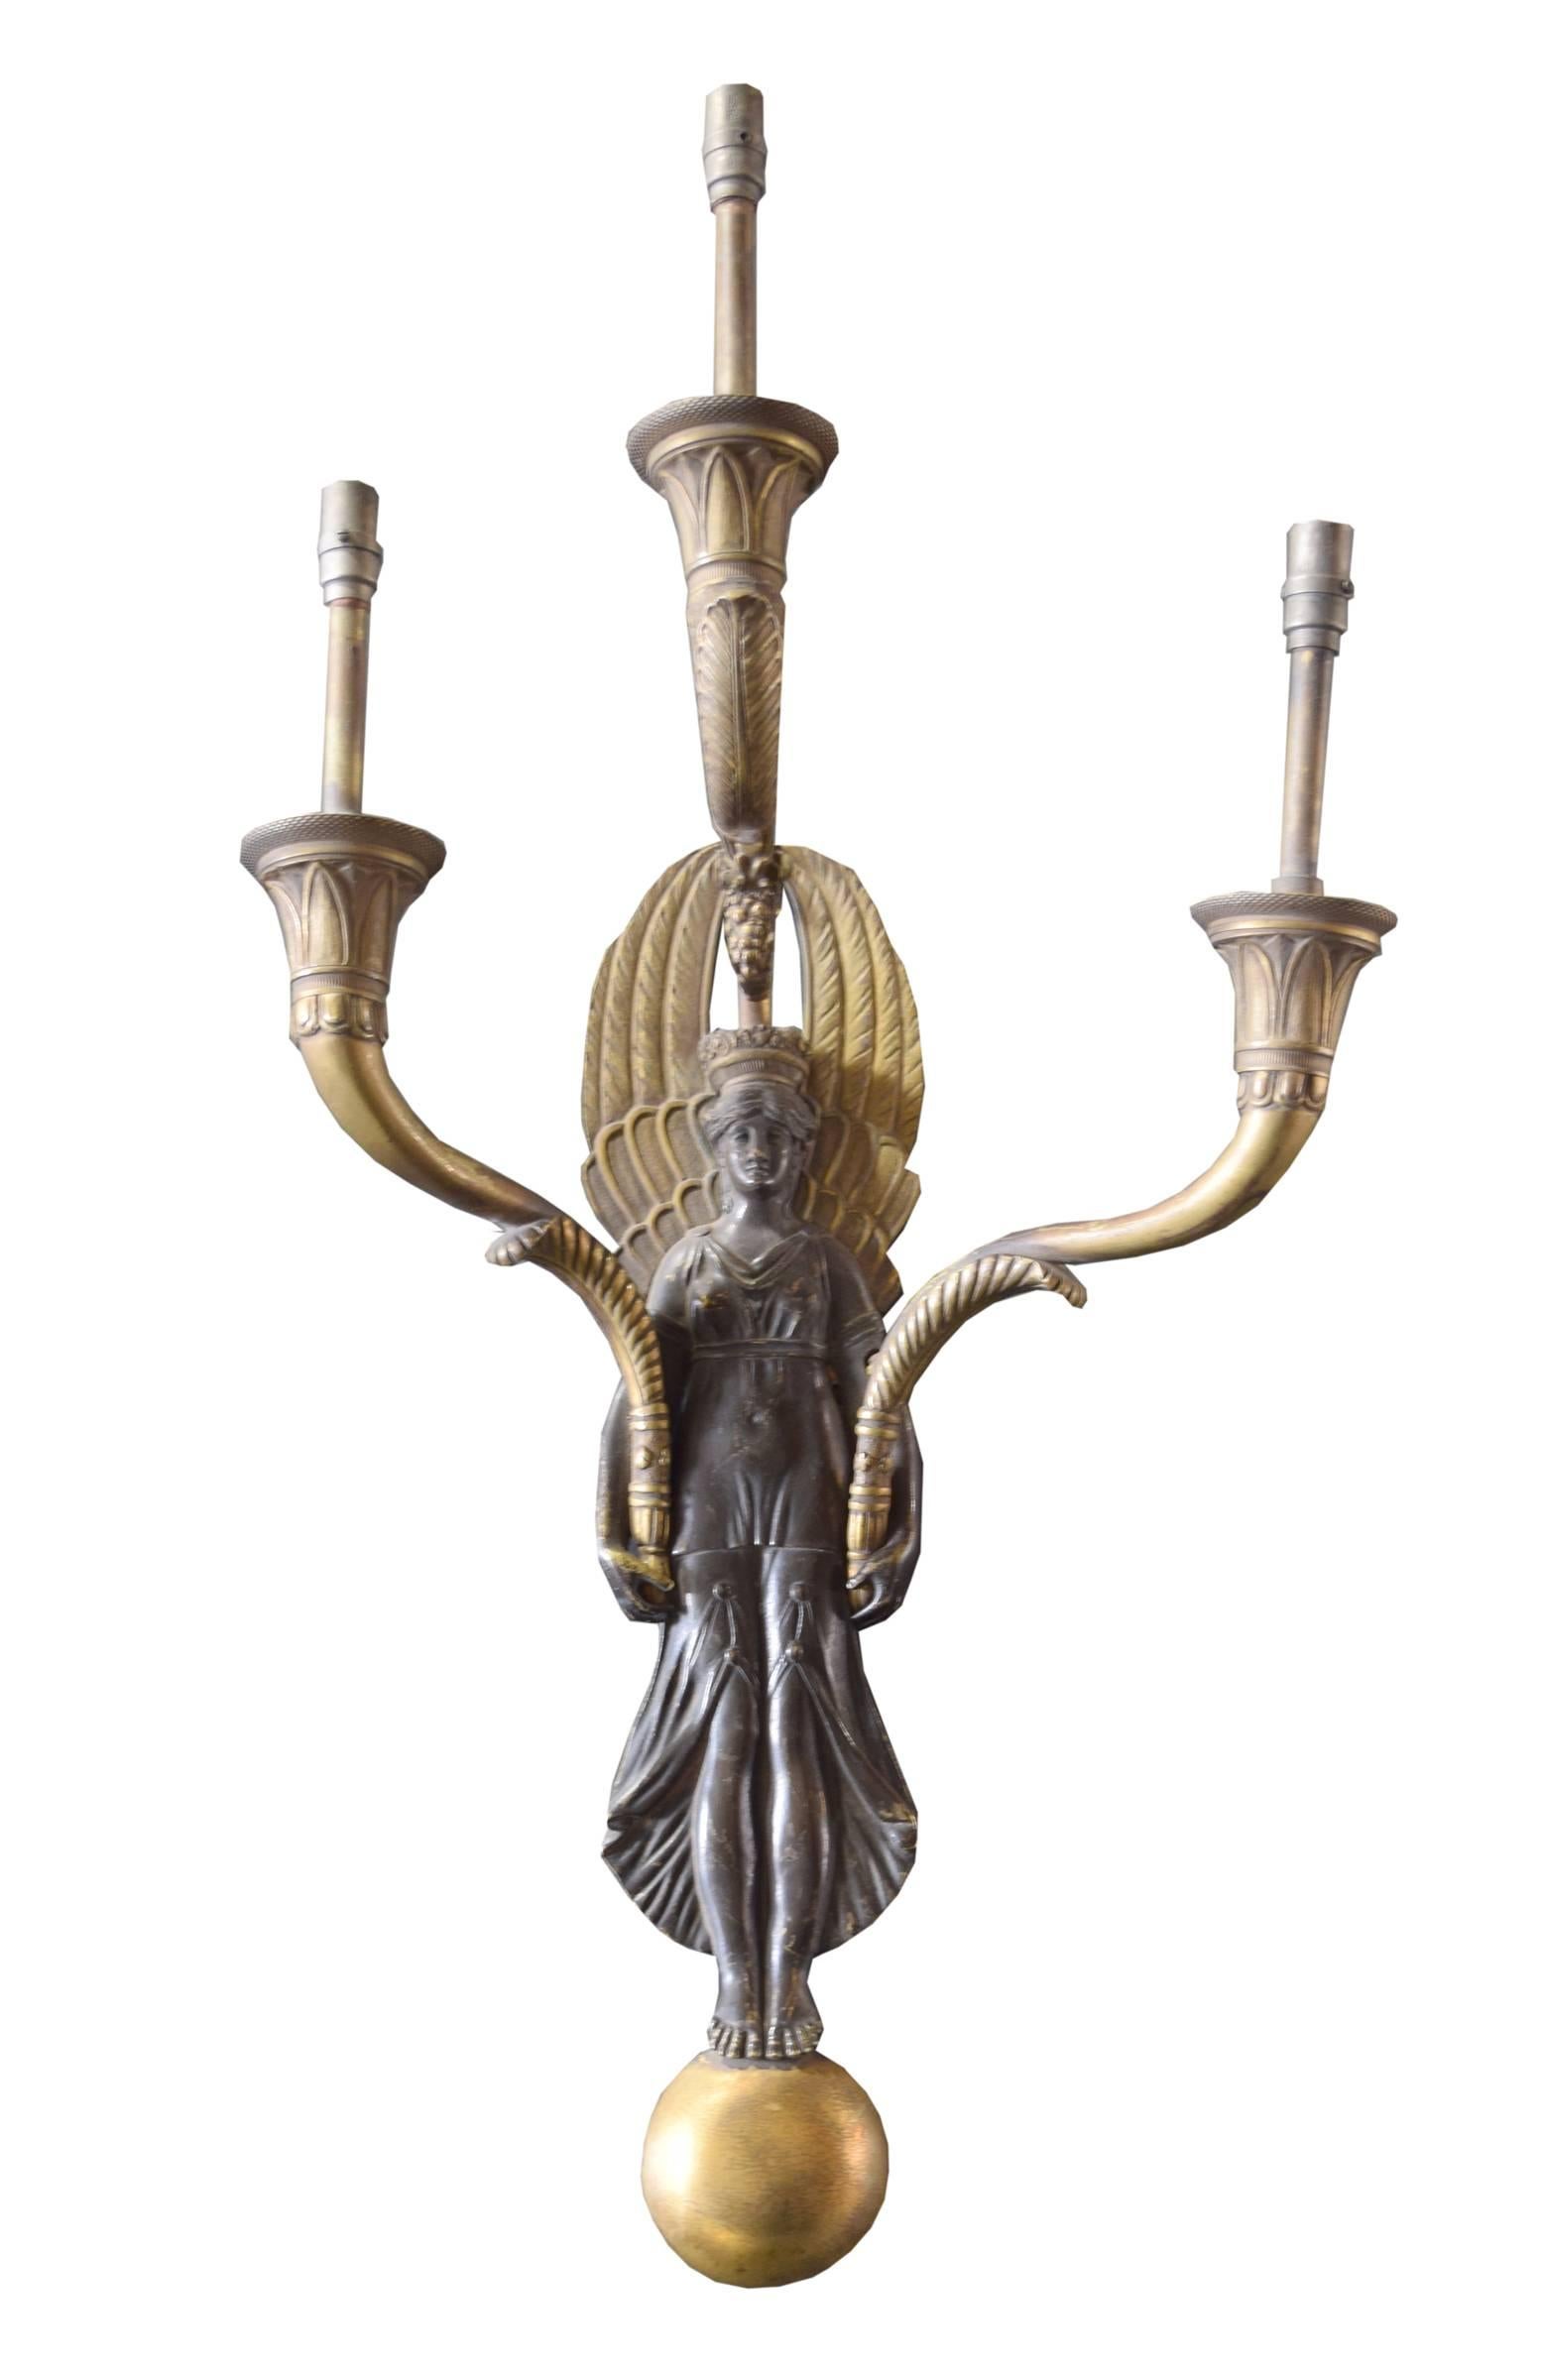 Pair of American bronze three-arm wall sconces with neoclassical winged maidens standing atop golden orbs. 

In original condition, fitted for gas. Need to be wired.